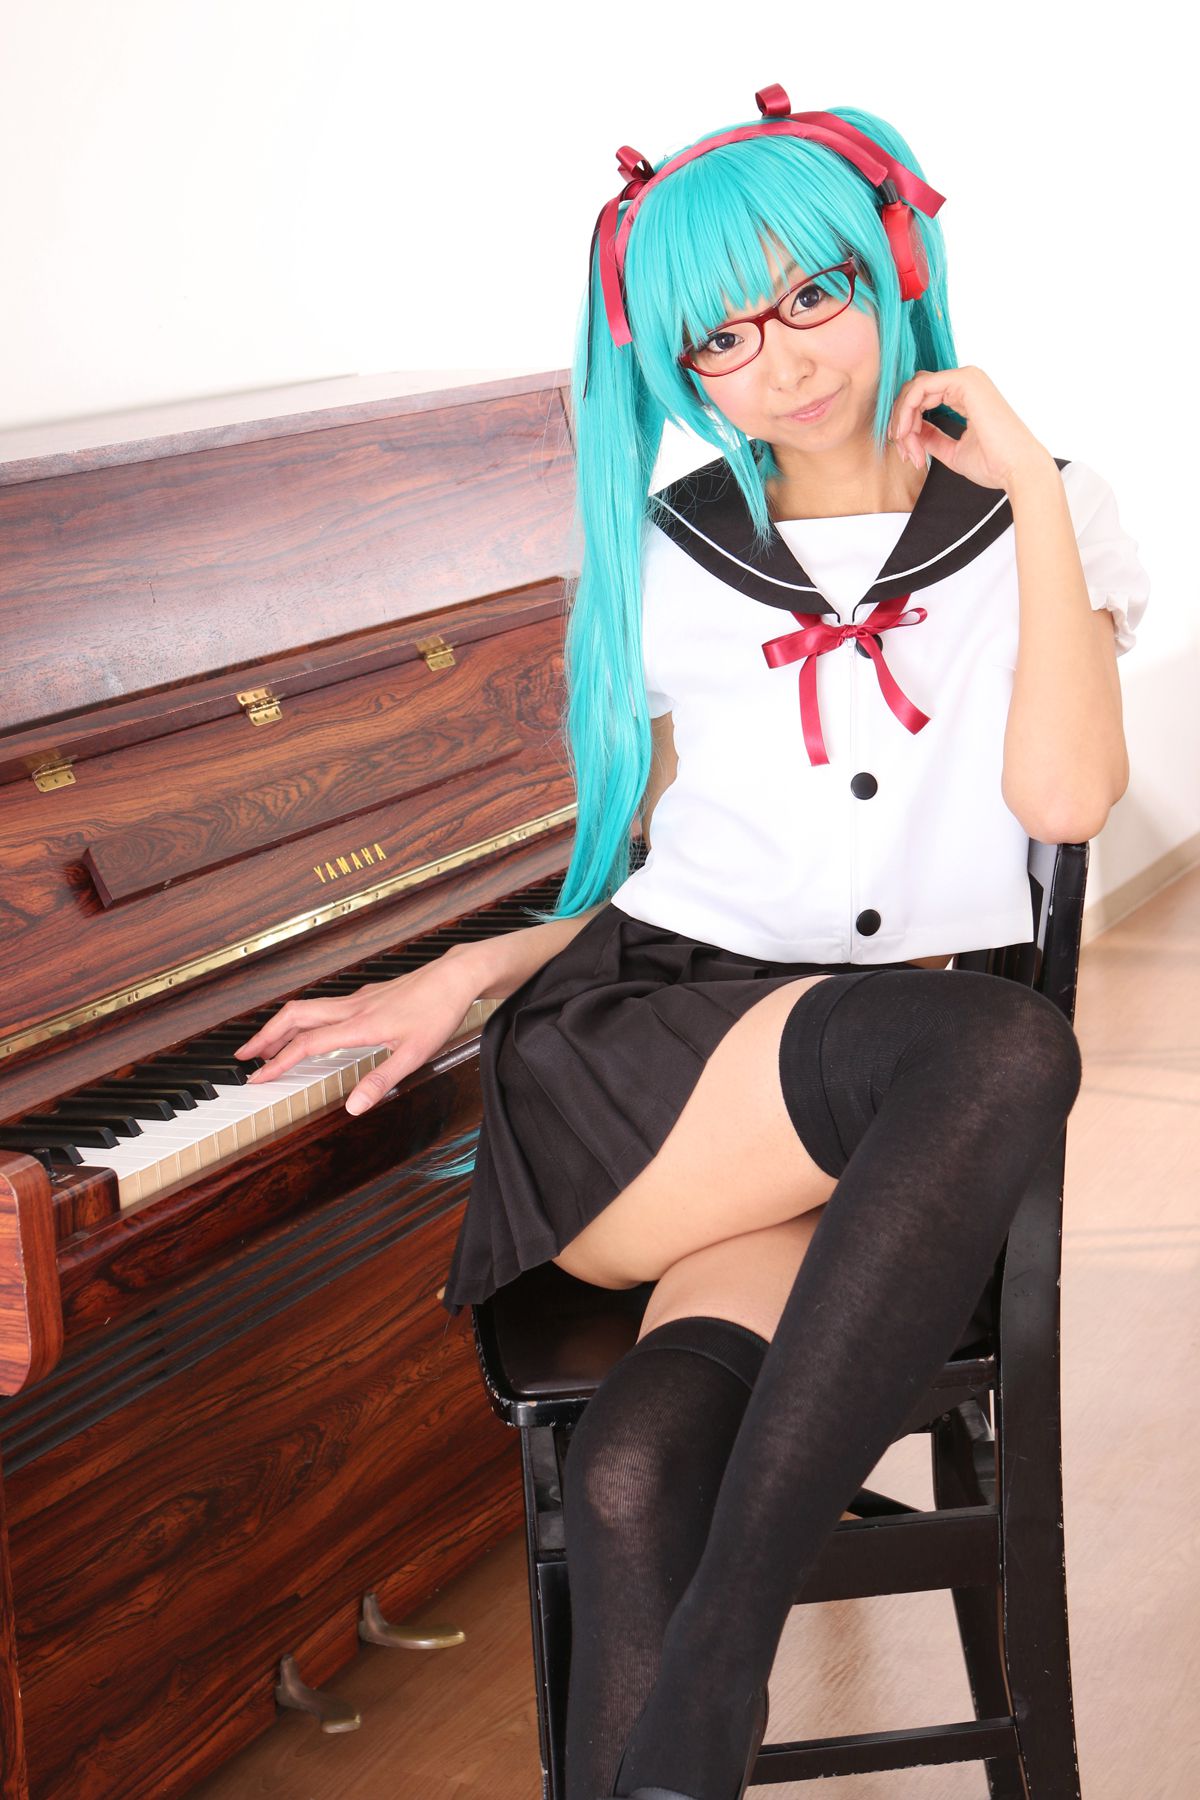 taotuhome[Cosplay套图] New Hatsune Miku from Vocaloid - So Sexy第129张